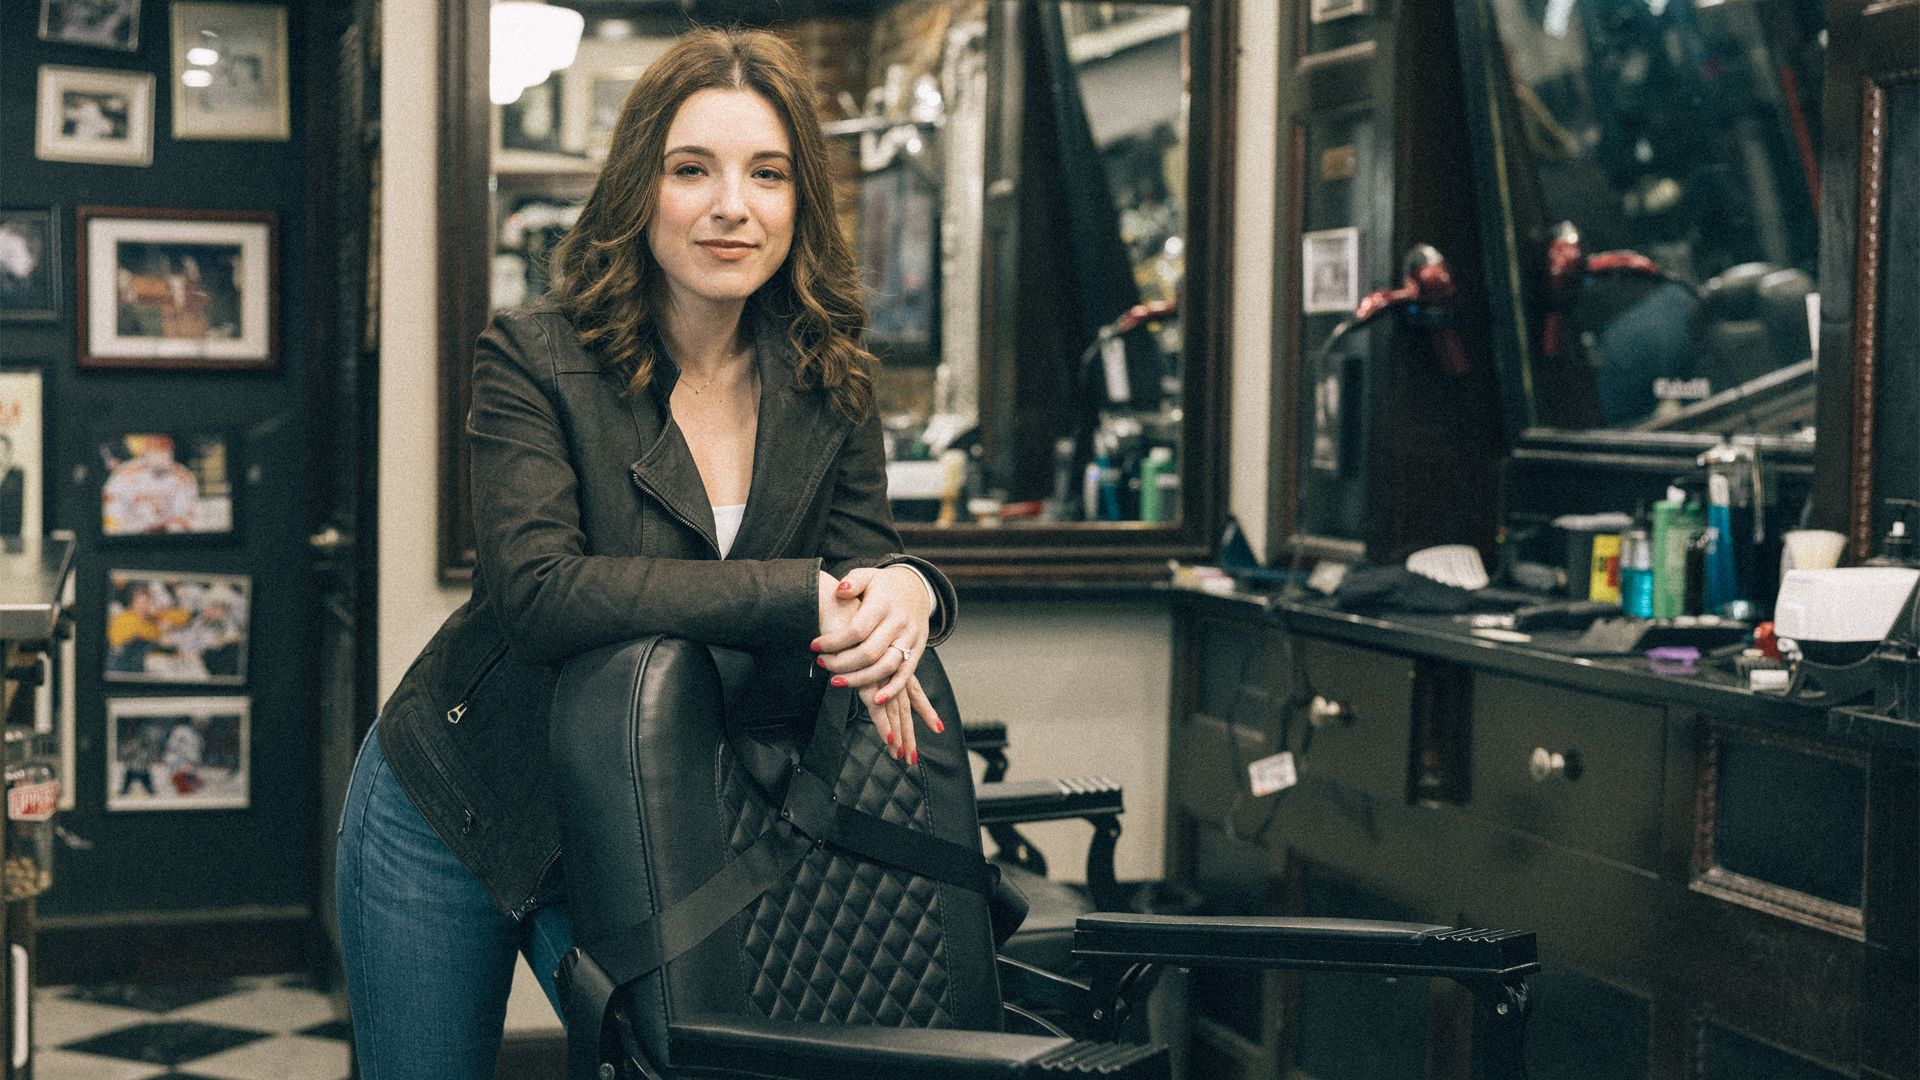 A woman poses for a portrait standing behind an empty barber chair in a barber shop